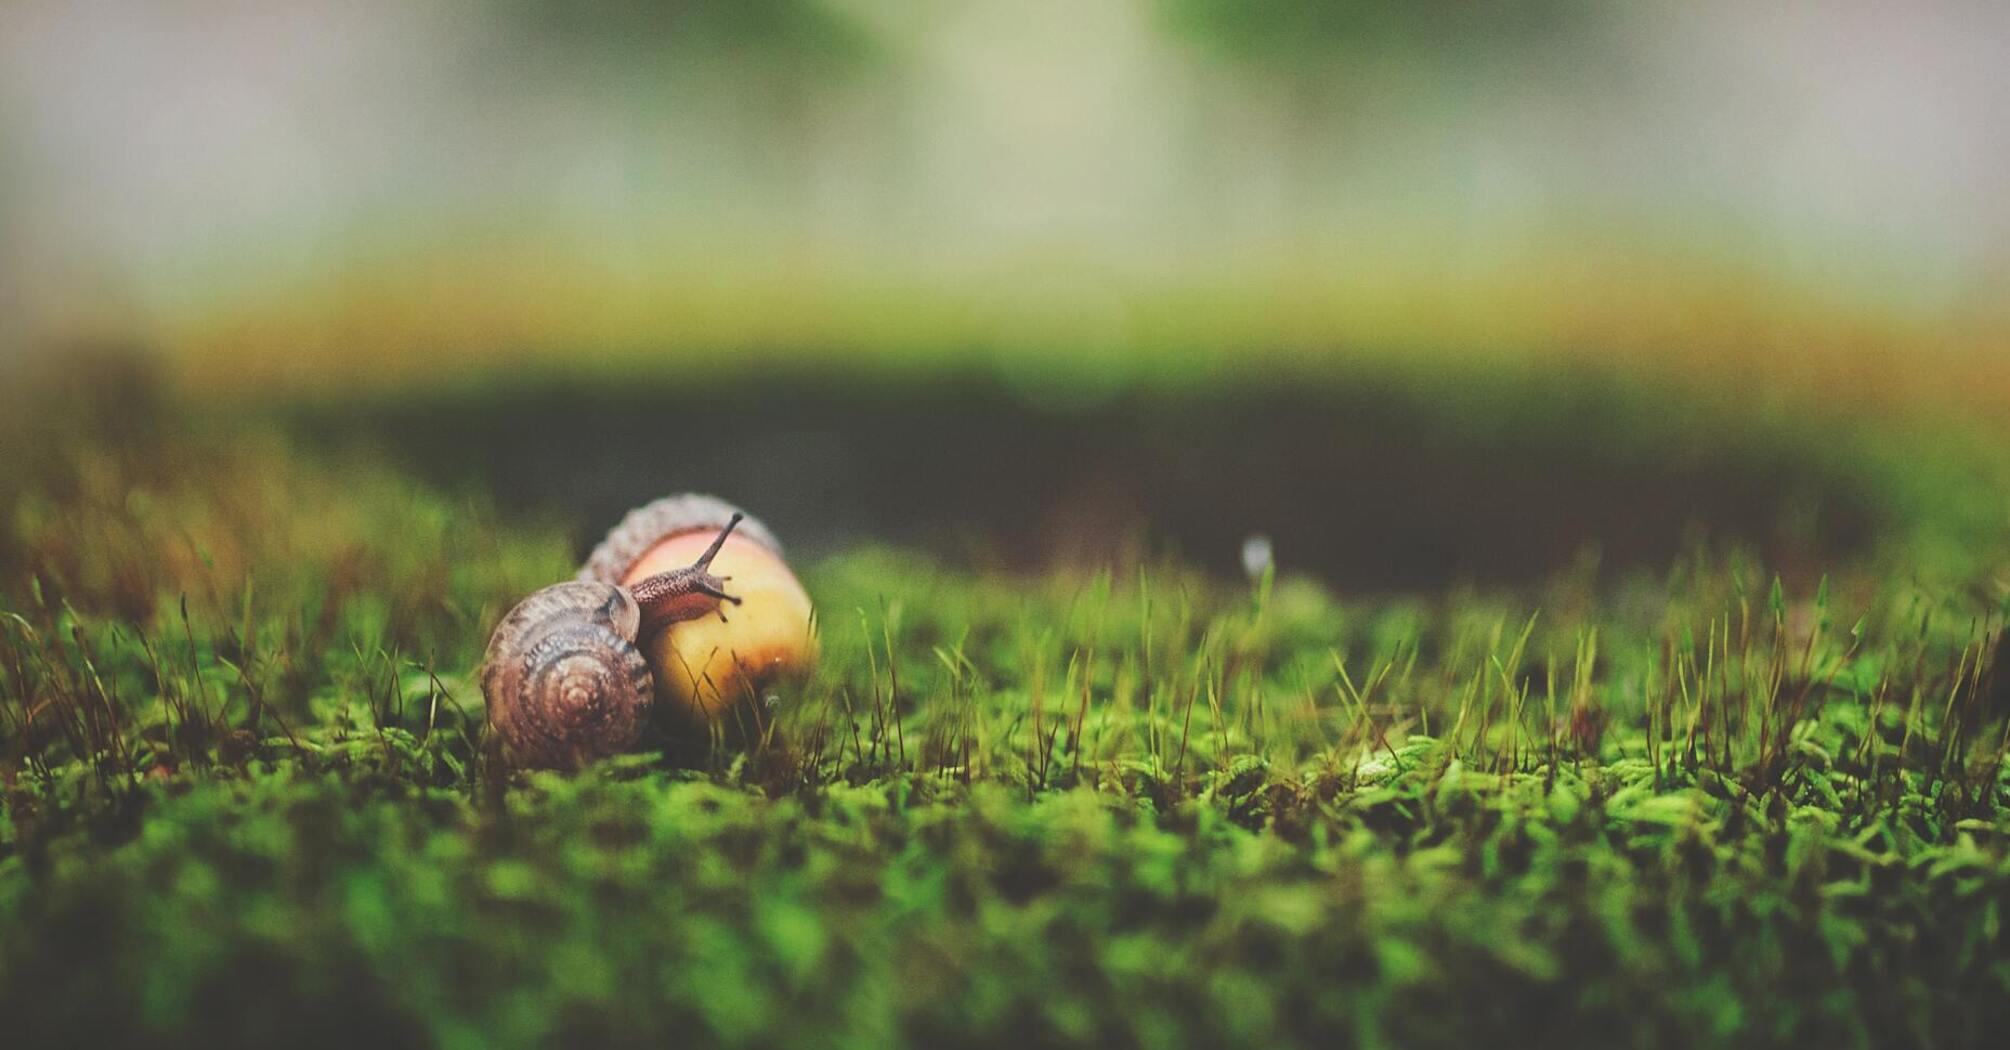 Snails will be out of the way: how to ward off pests from the garden